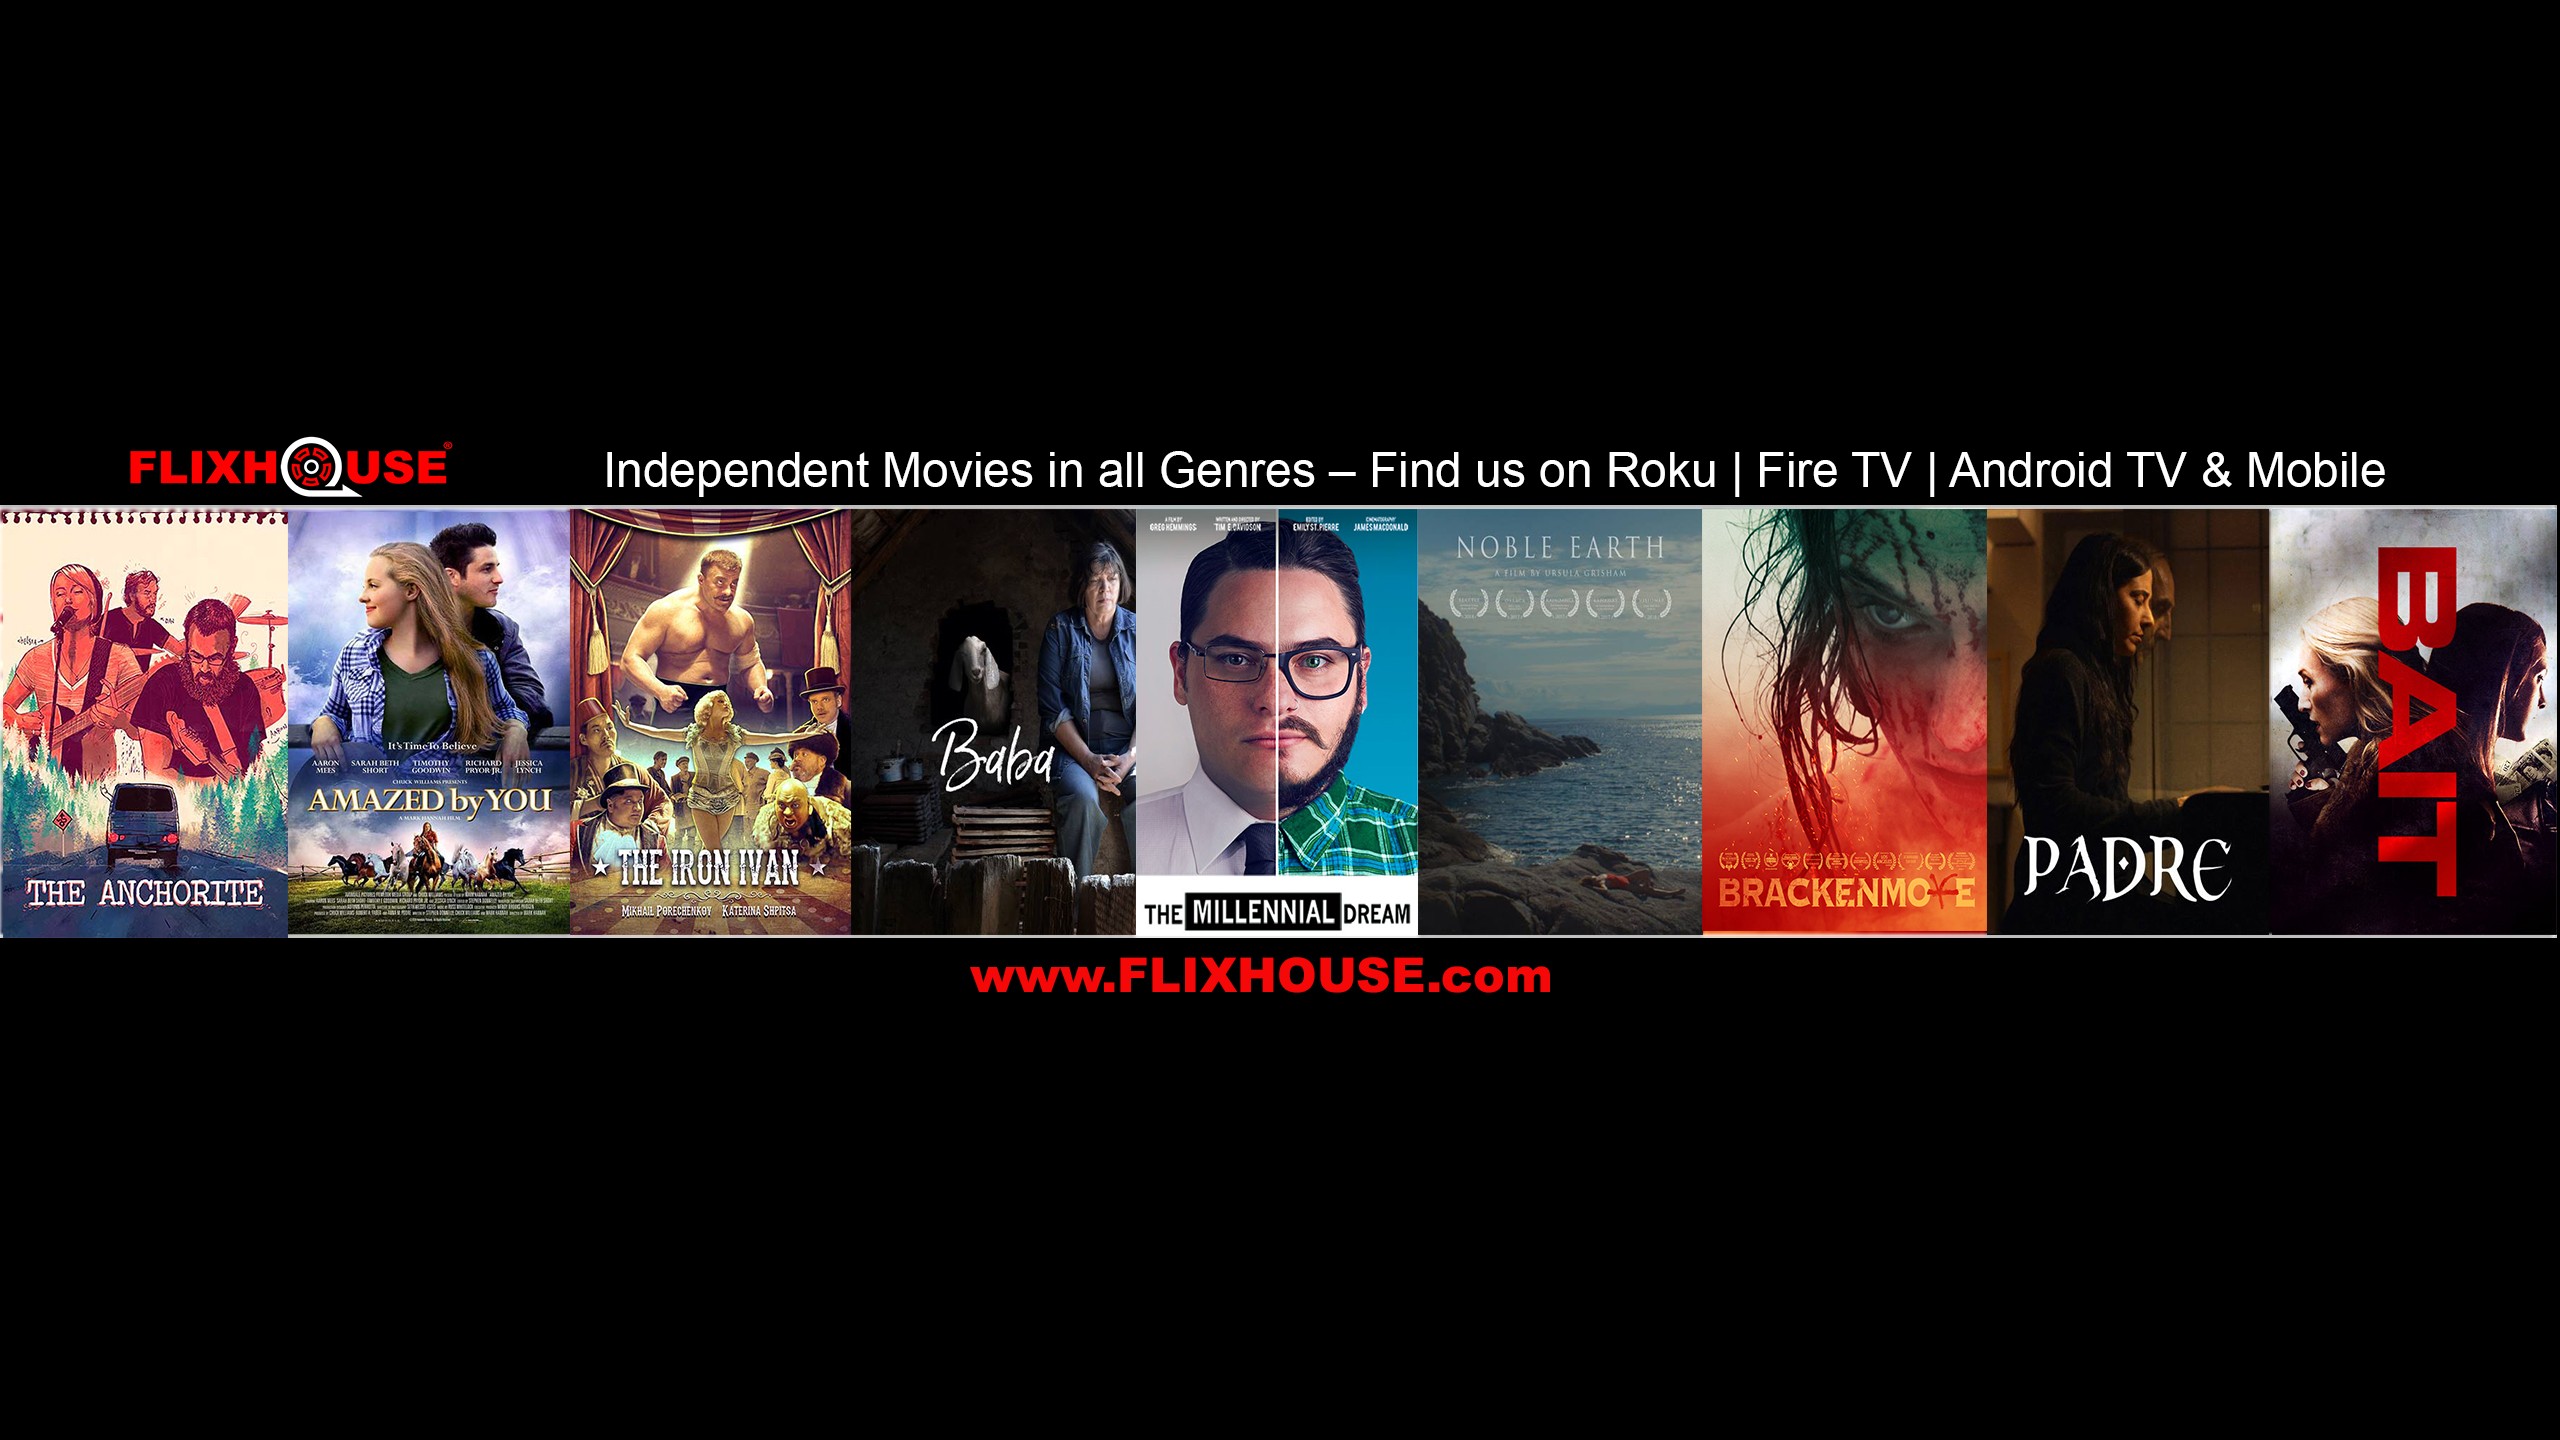 Flixhouse Indie Movies Tv Free A Global Streaming Service Headquartered In L A Linkedin